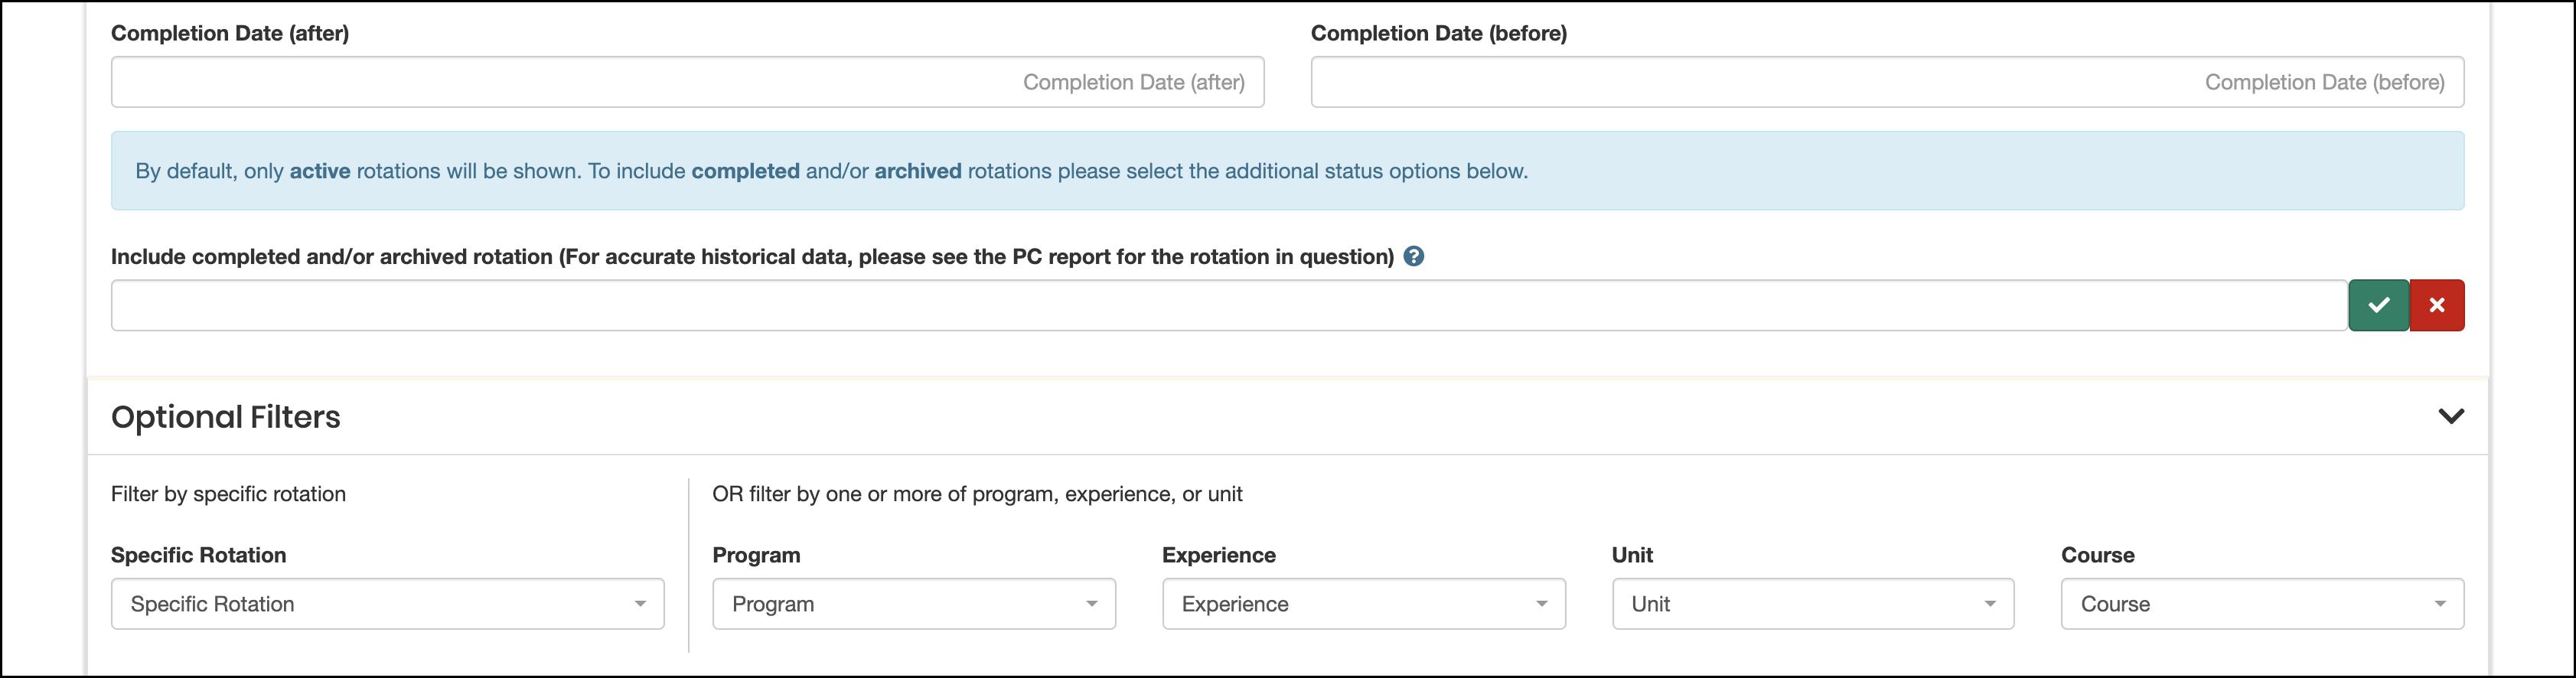 requirement report showing optional filters